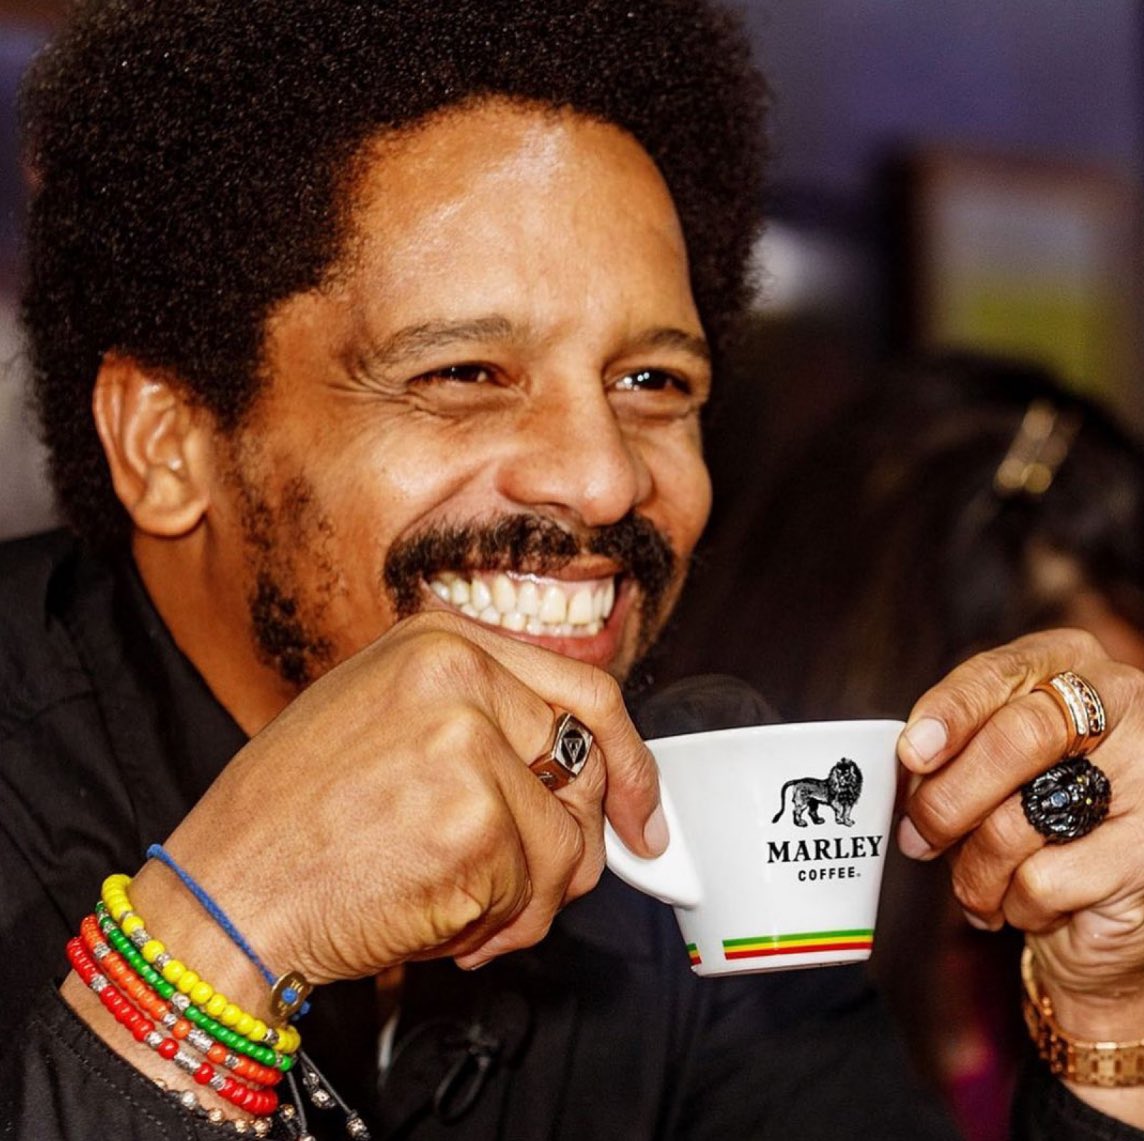 Celebrating @romarley with a very Blessed Earthstrong today! ✨🙌🏾 ☀️🦁 Bob’s son Rohan created Marley Coffee after a visit to a farm in Ethiopia - the birthplace of coffee. ☕️Let’s raise a cup! #MarleyCoffee #LionOrder